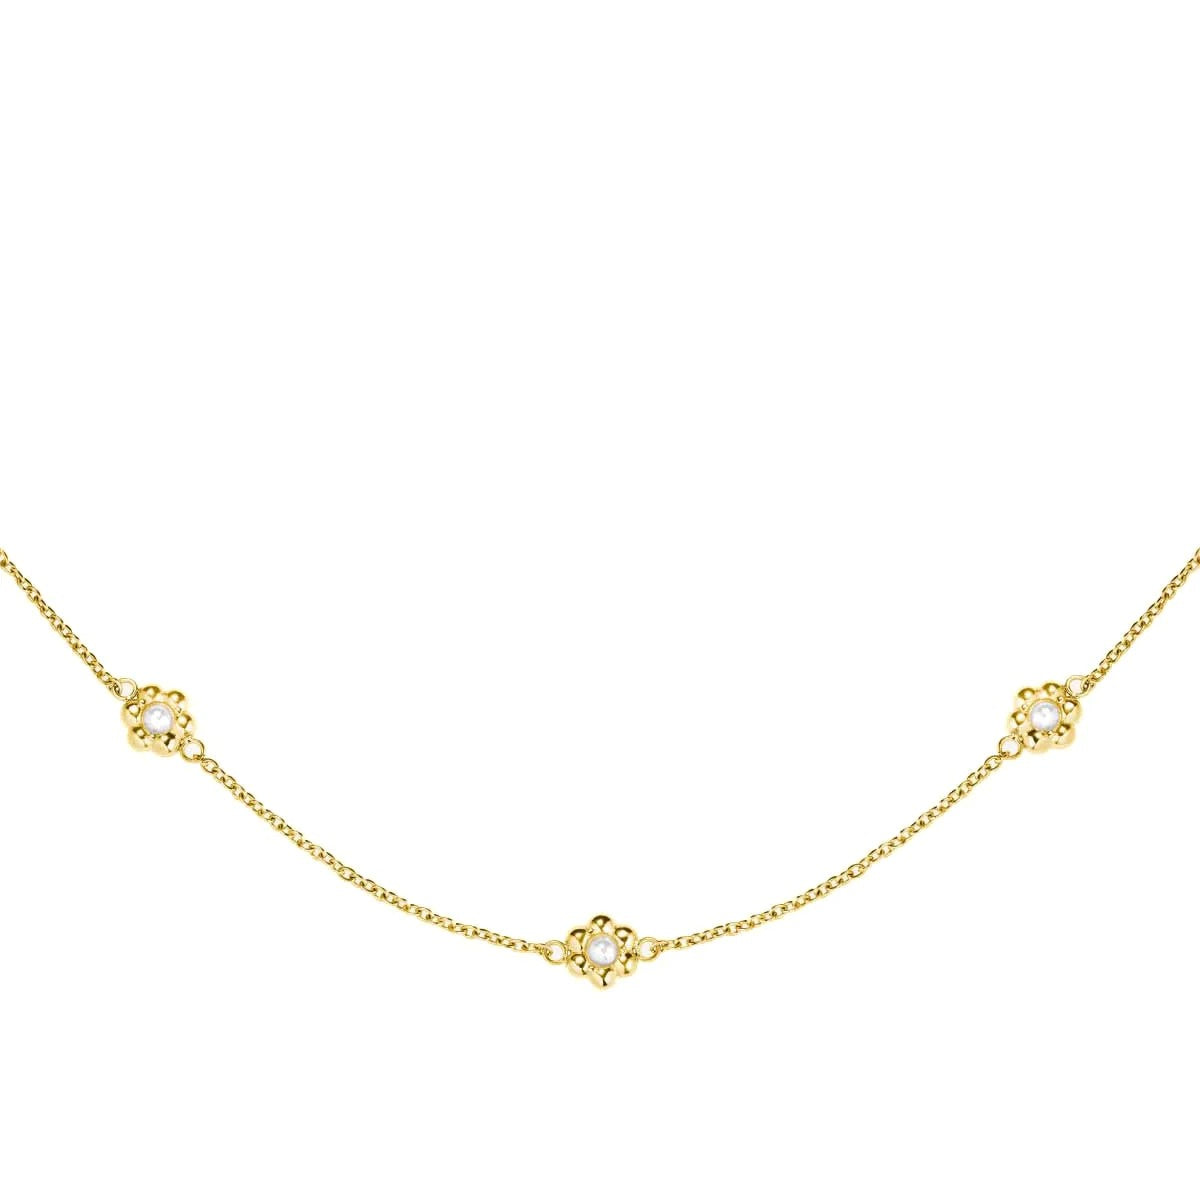 Daisy Flower Necklace - Gold